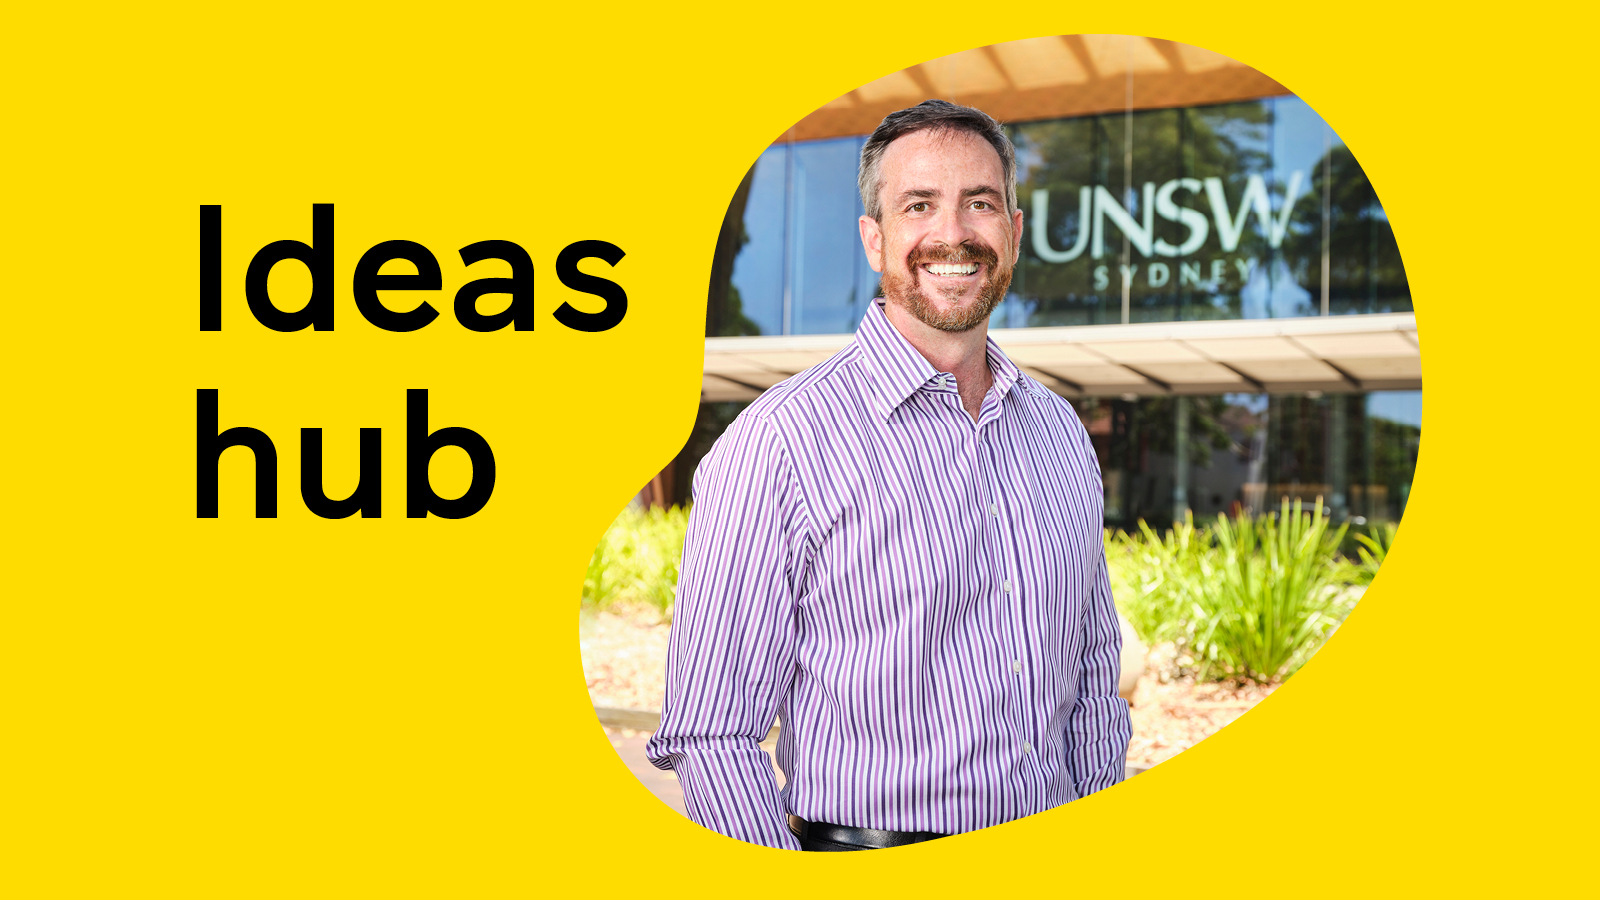 The Ideas Hub is live